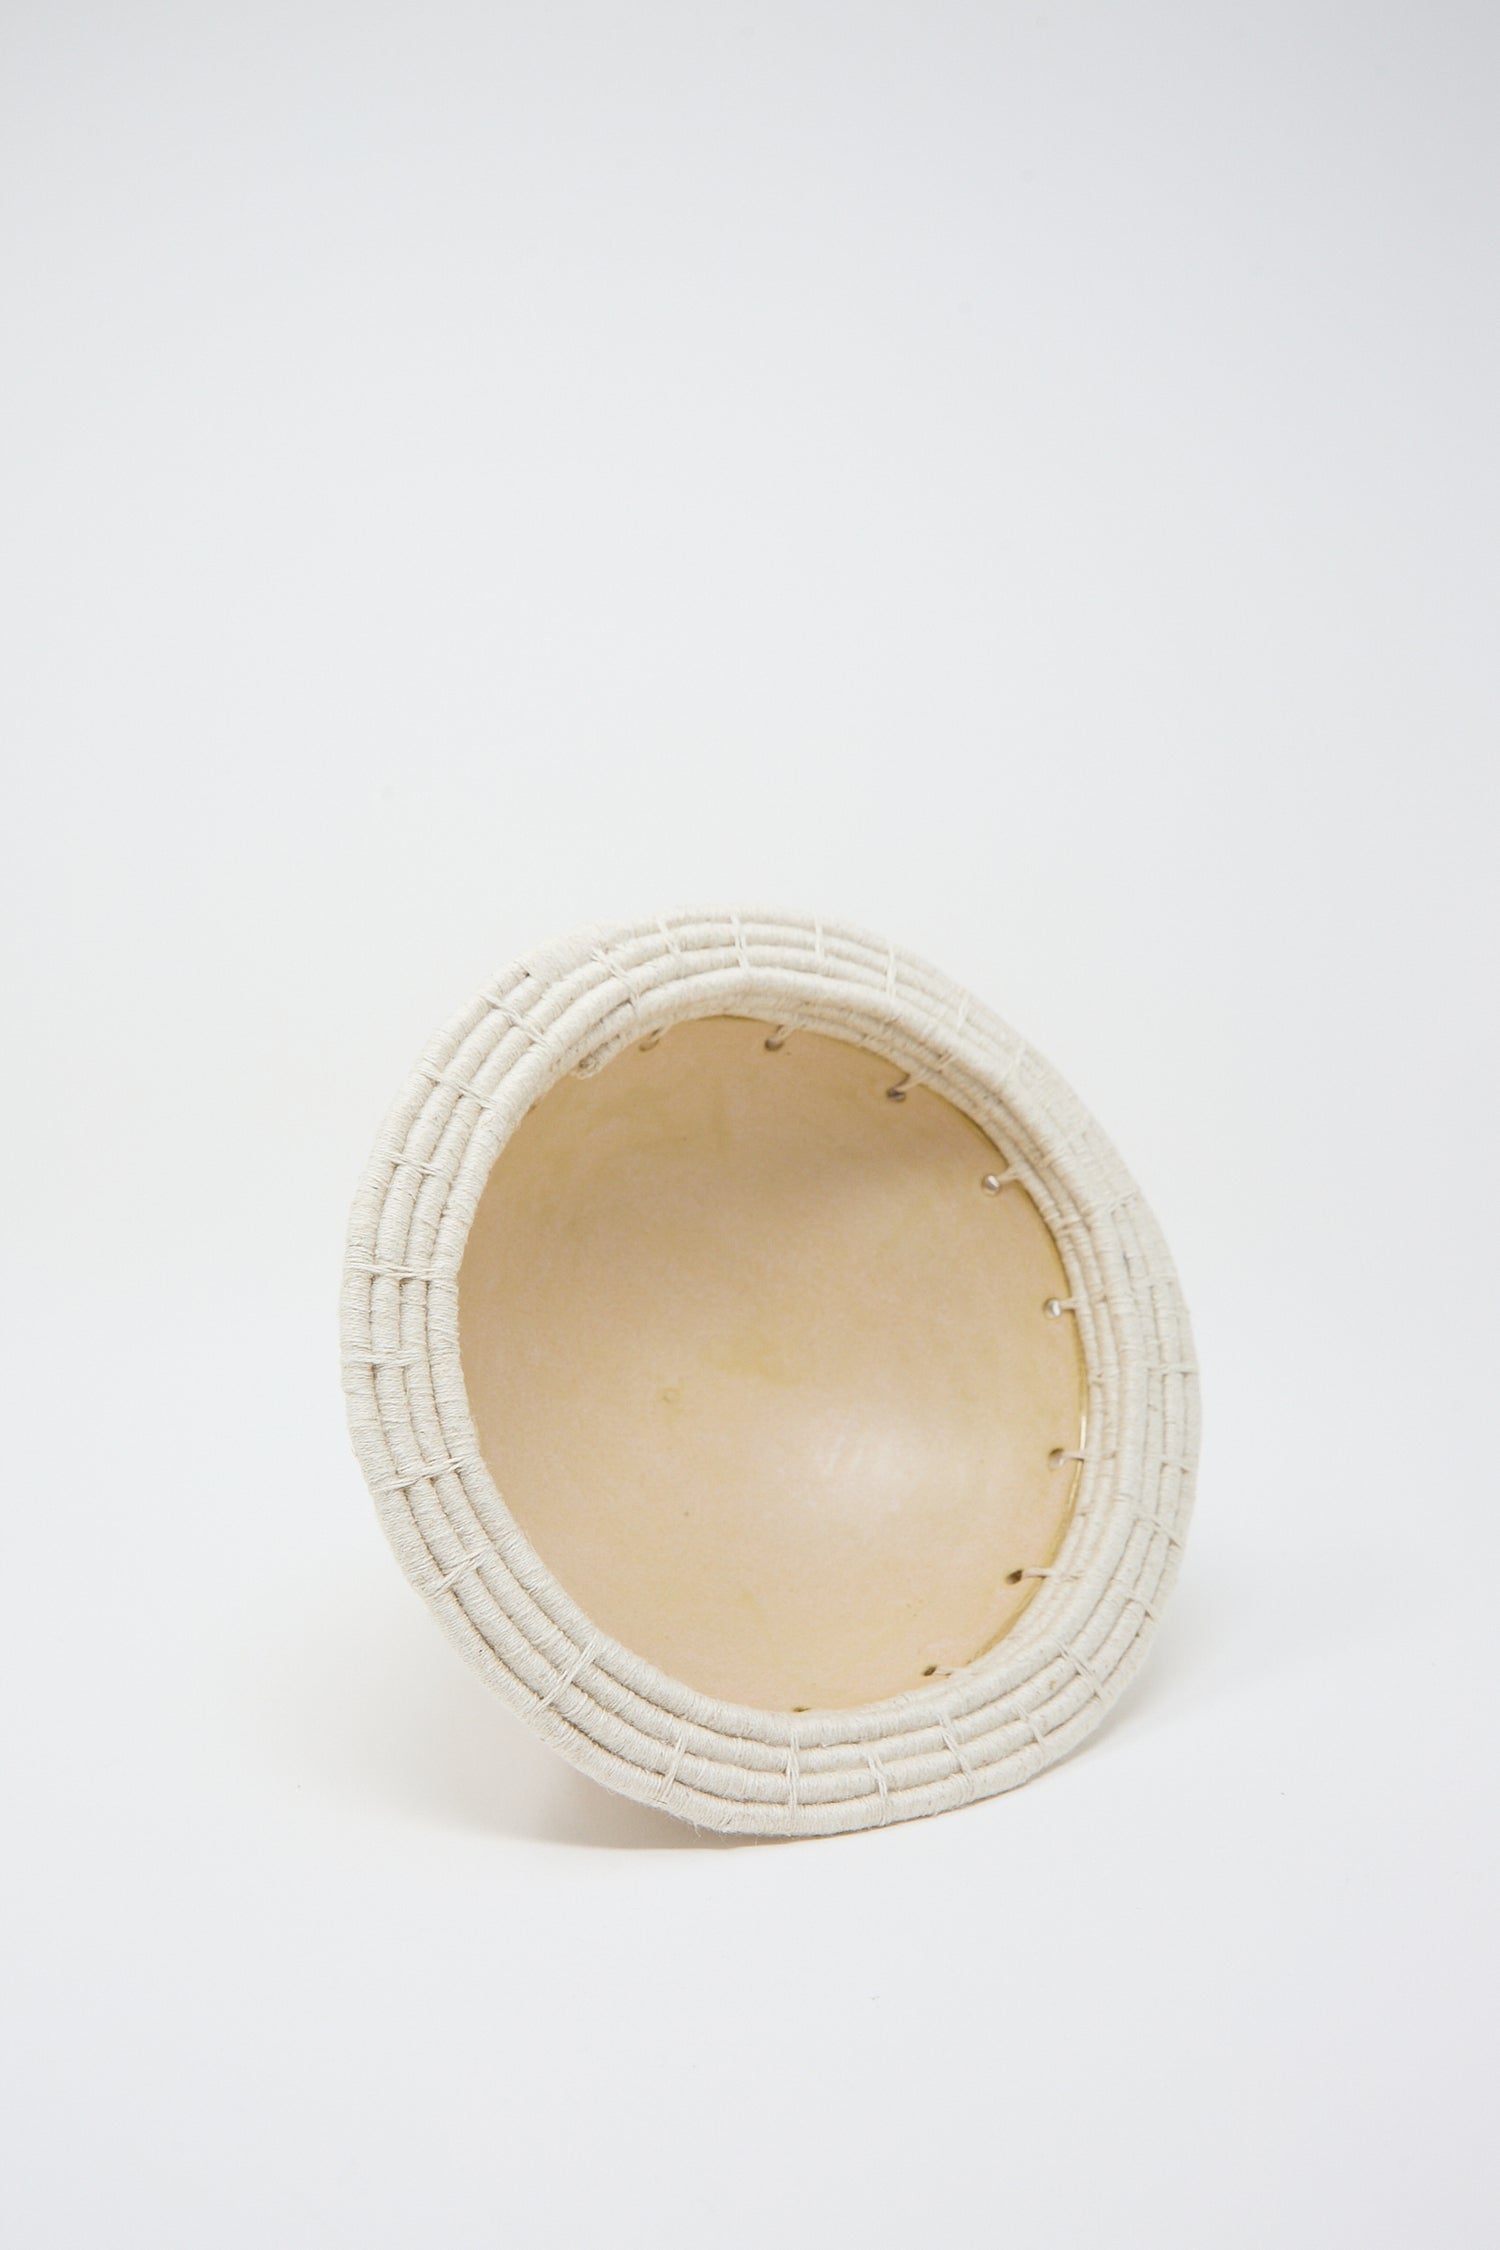 A Decorative Bowl #805 in Tan by Karen Tinney, viewed from the side against a white background, crafted from California stoneware.